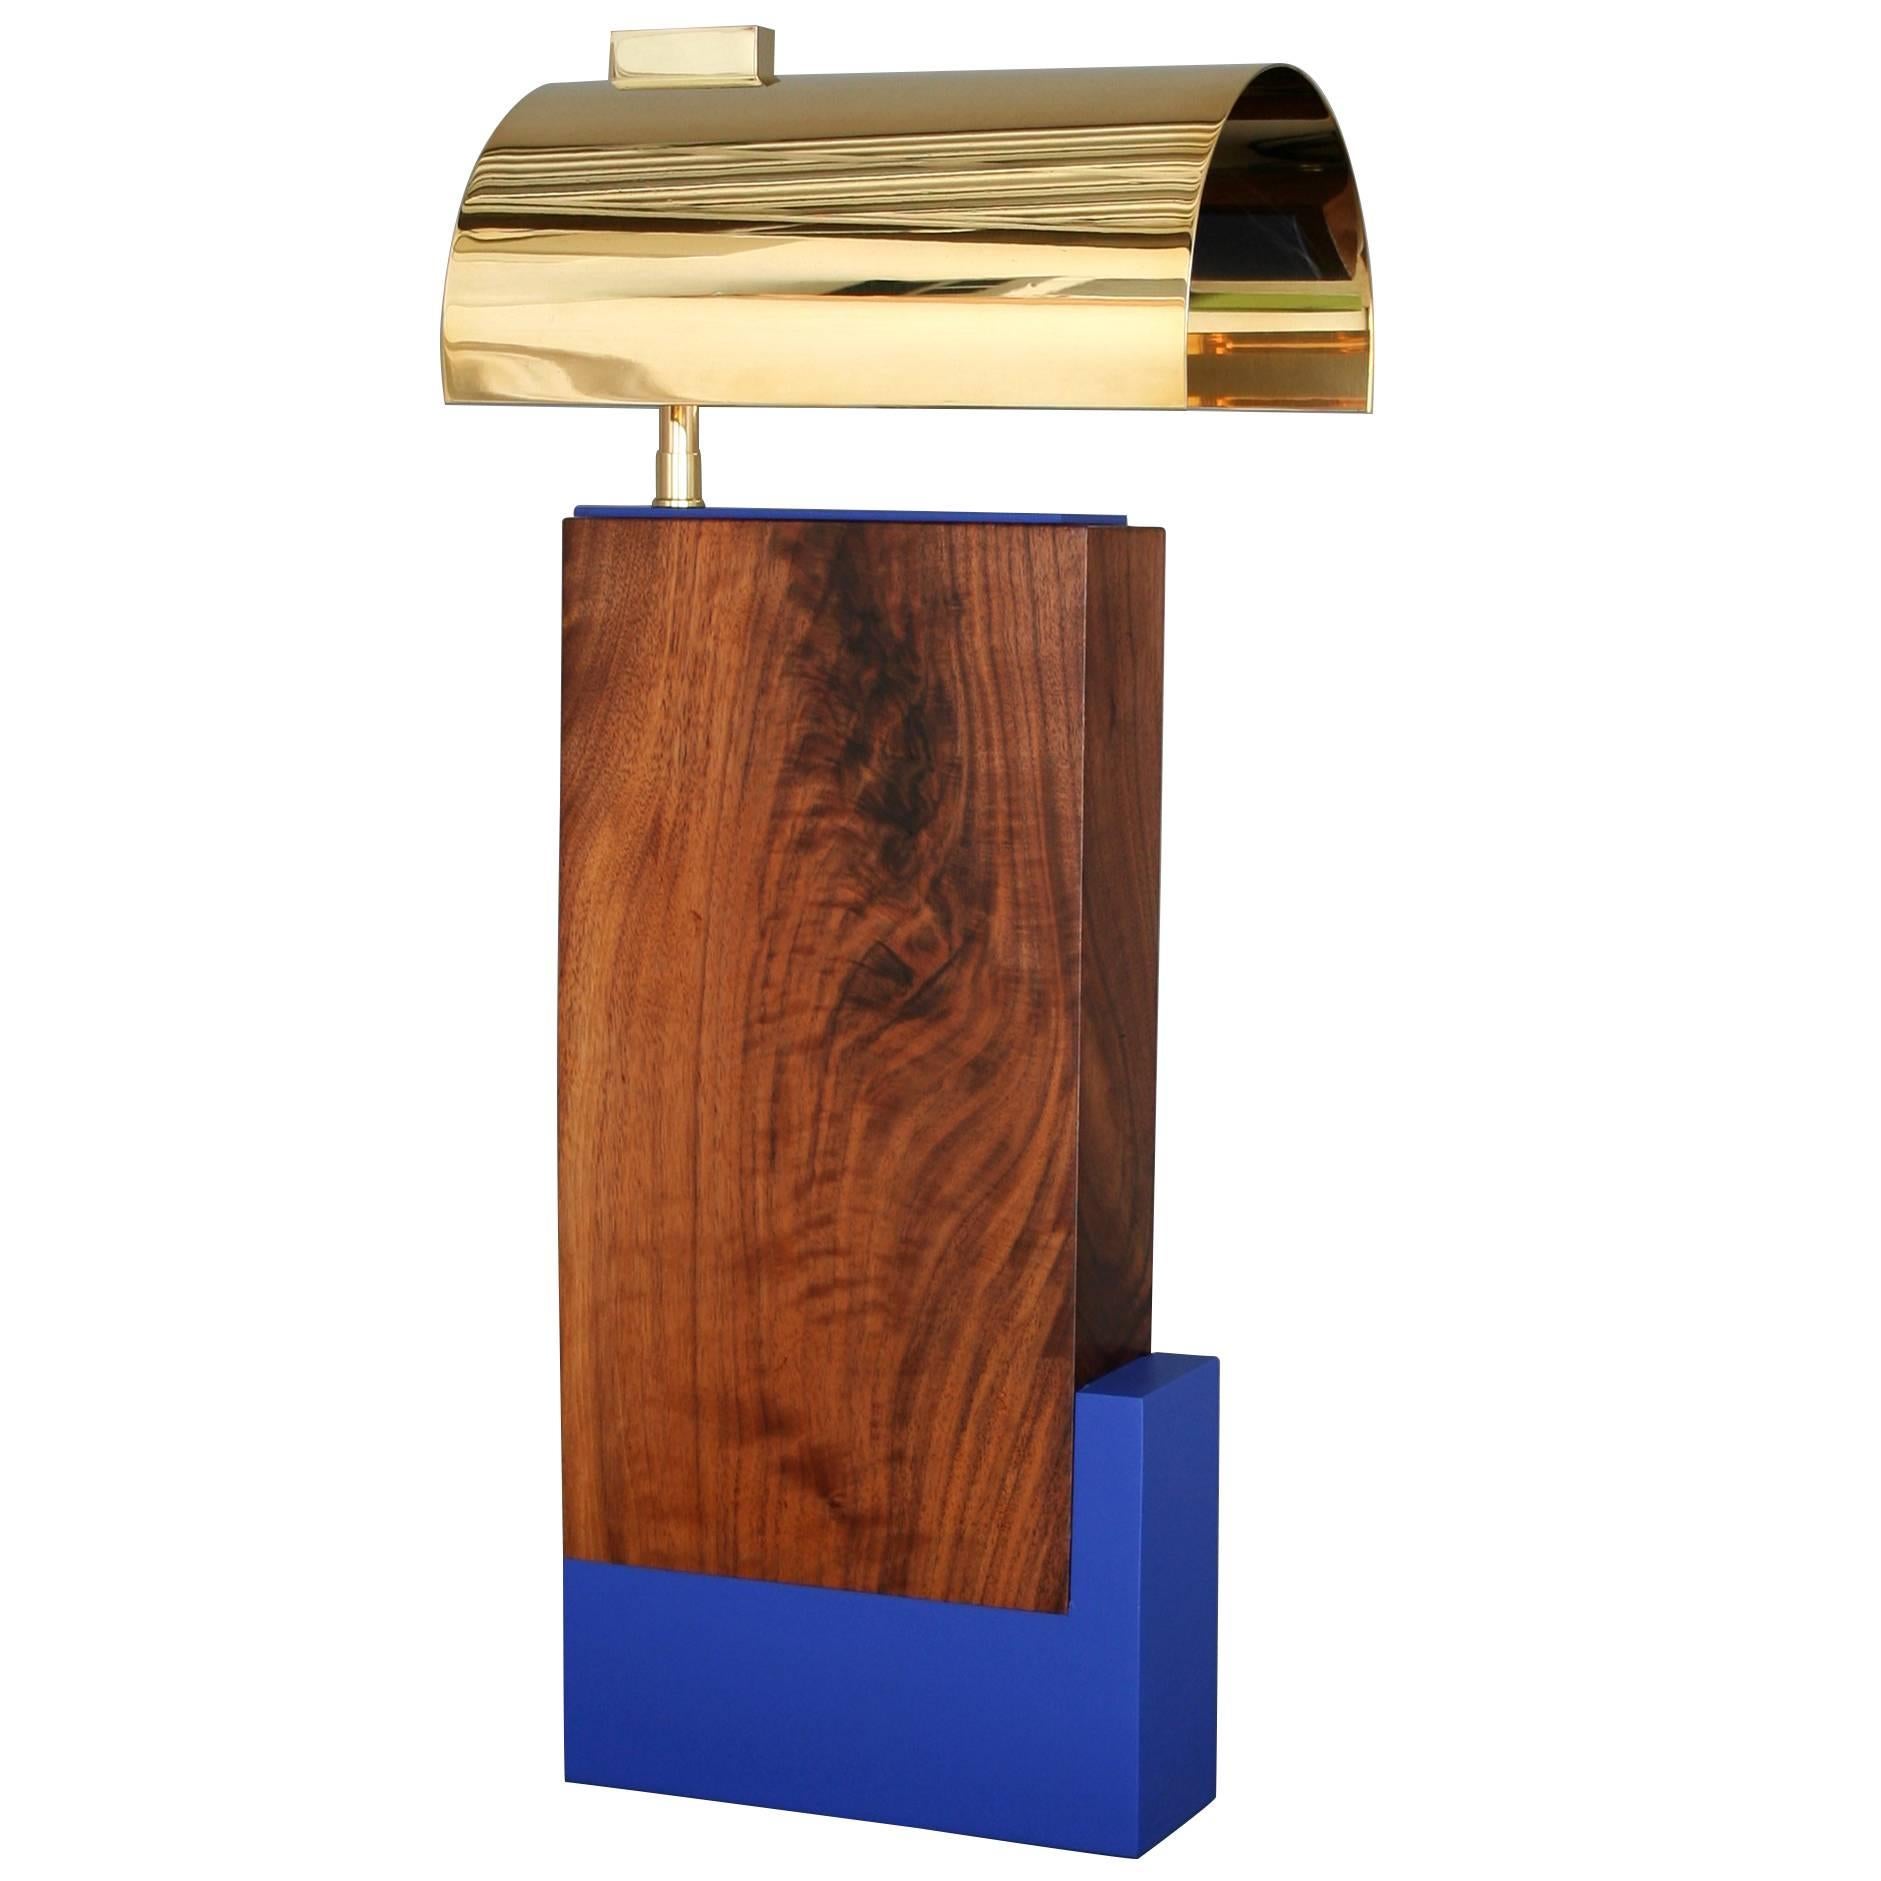 Bauhaus Style Contemporary Table lamp in Walnut and Brass by Vivian Carbonell